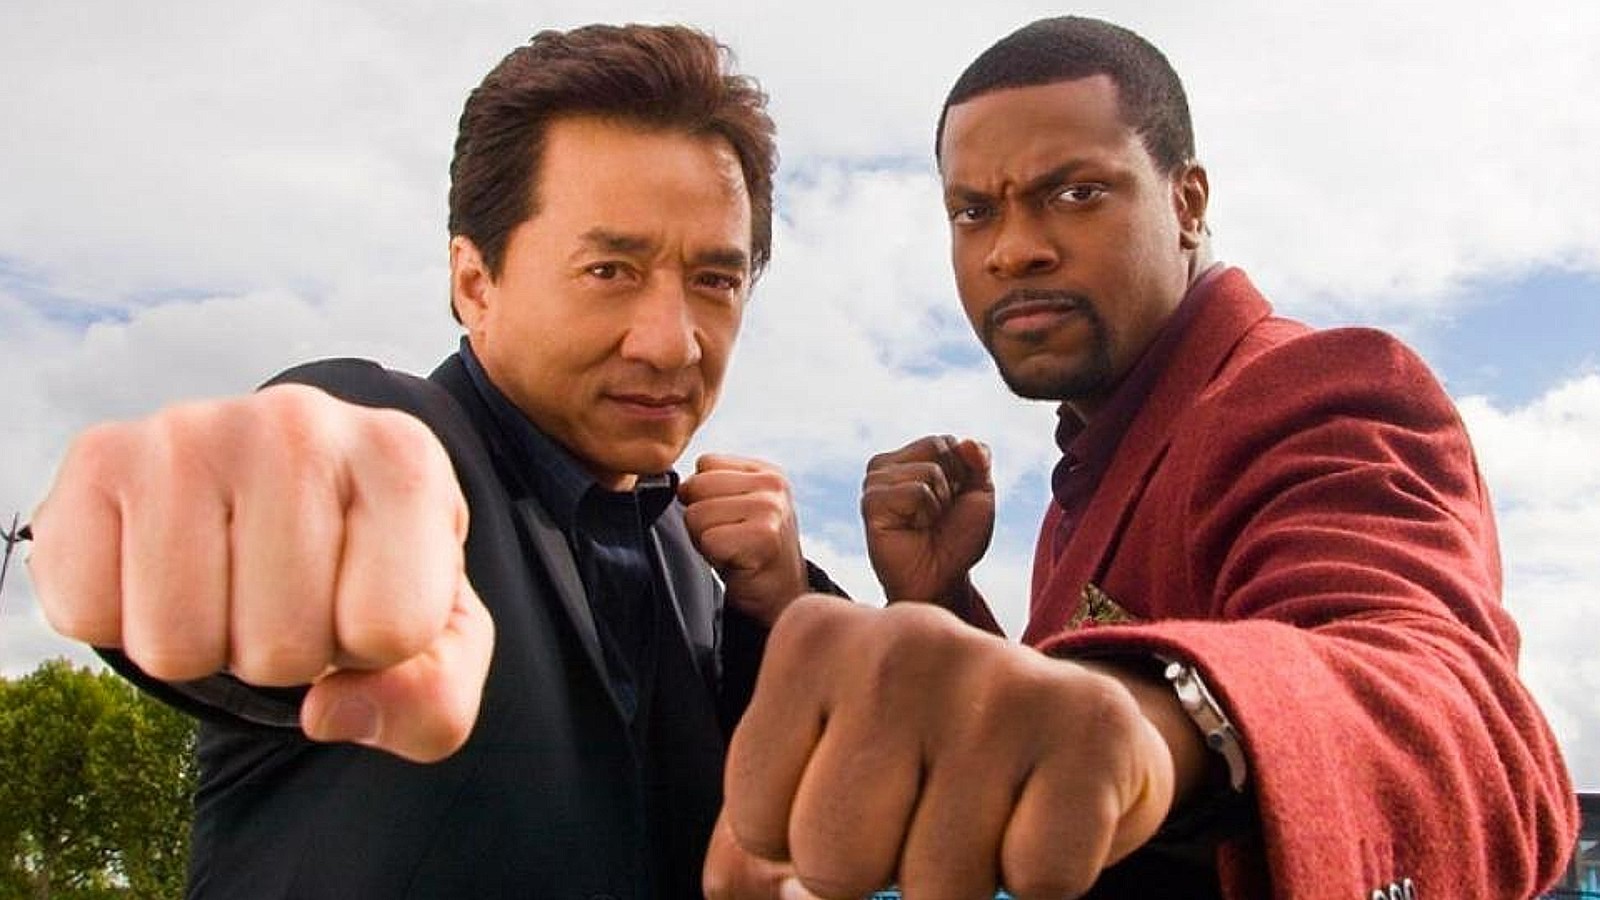 Jackie Chan and Chris Tucker are set to reprise their roles in Rush Hour 4